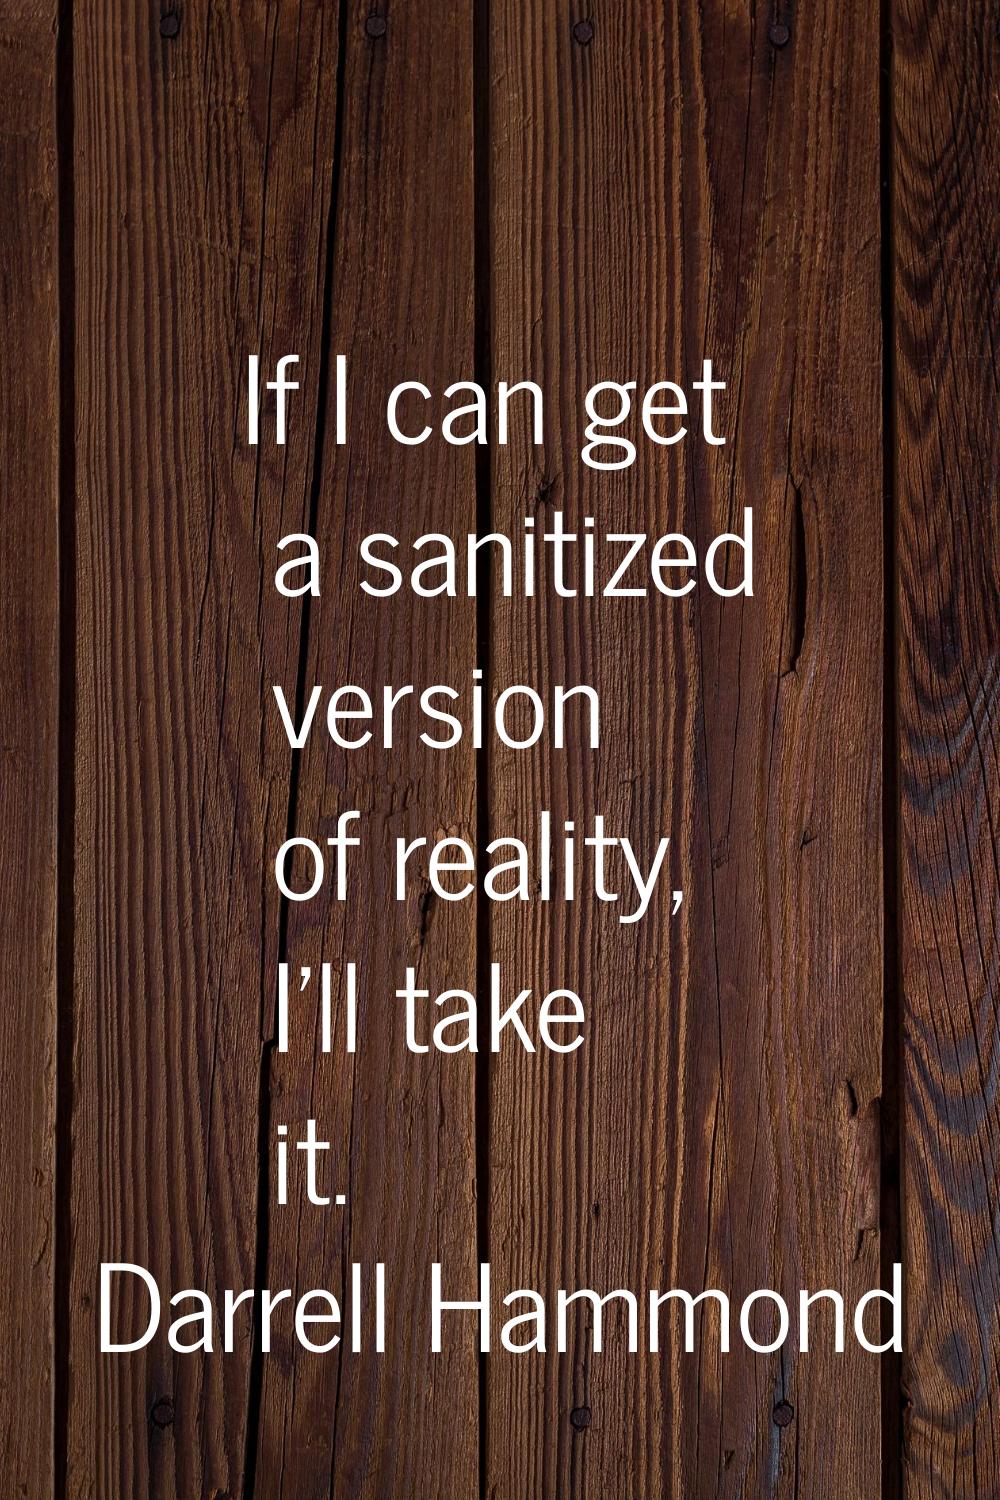 If I can get a sanitized version of reality, I'll take it.